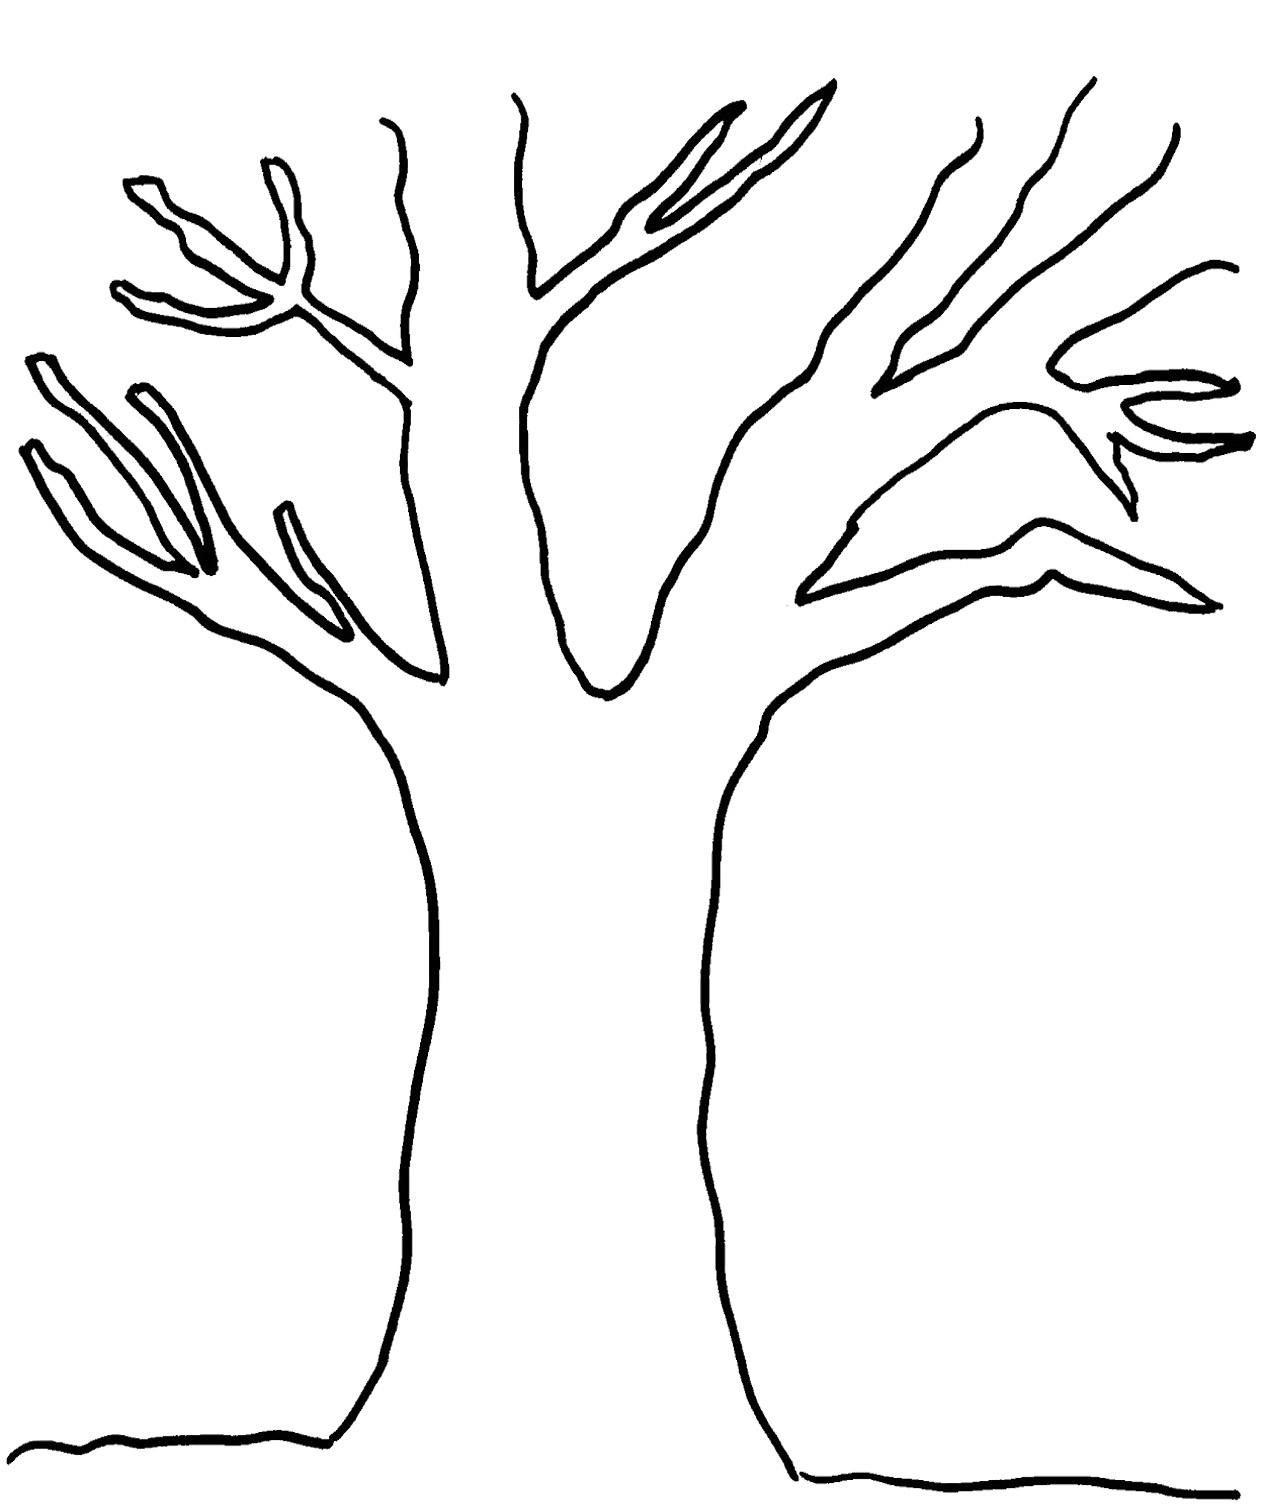 Tree no leaves clipart black and white - Clip Art Library